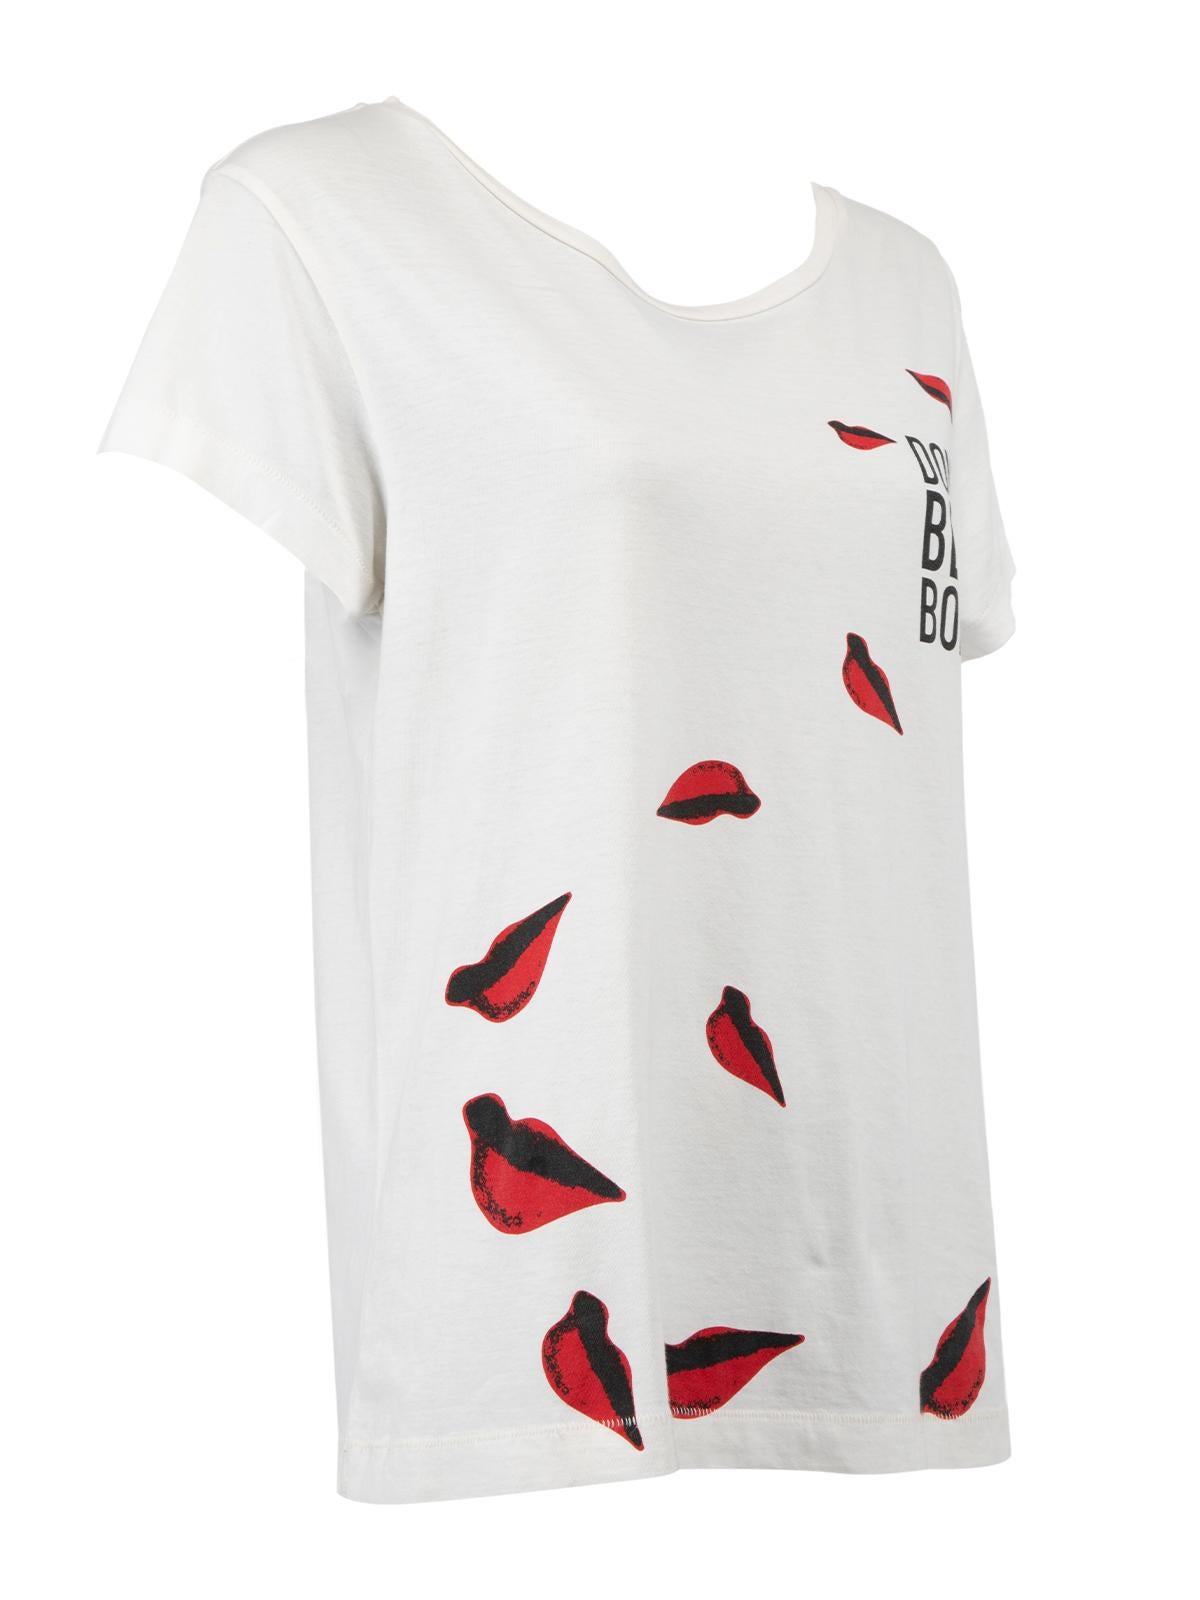 CONDITION is Very good. Minimal wear to t-shirt is evident. Minimal wear to the thread at the hemline on this used designer resale item. Details Cream Cotton Graphic T-shirt Short sleeves Round neckline Red lips and DONT BE A BORE printed on front